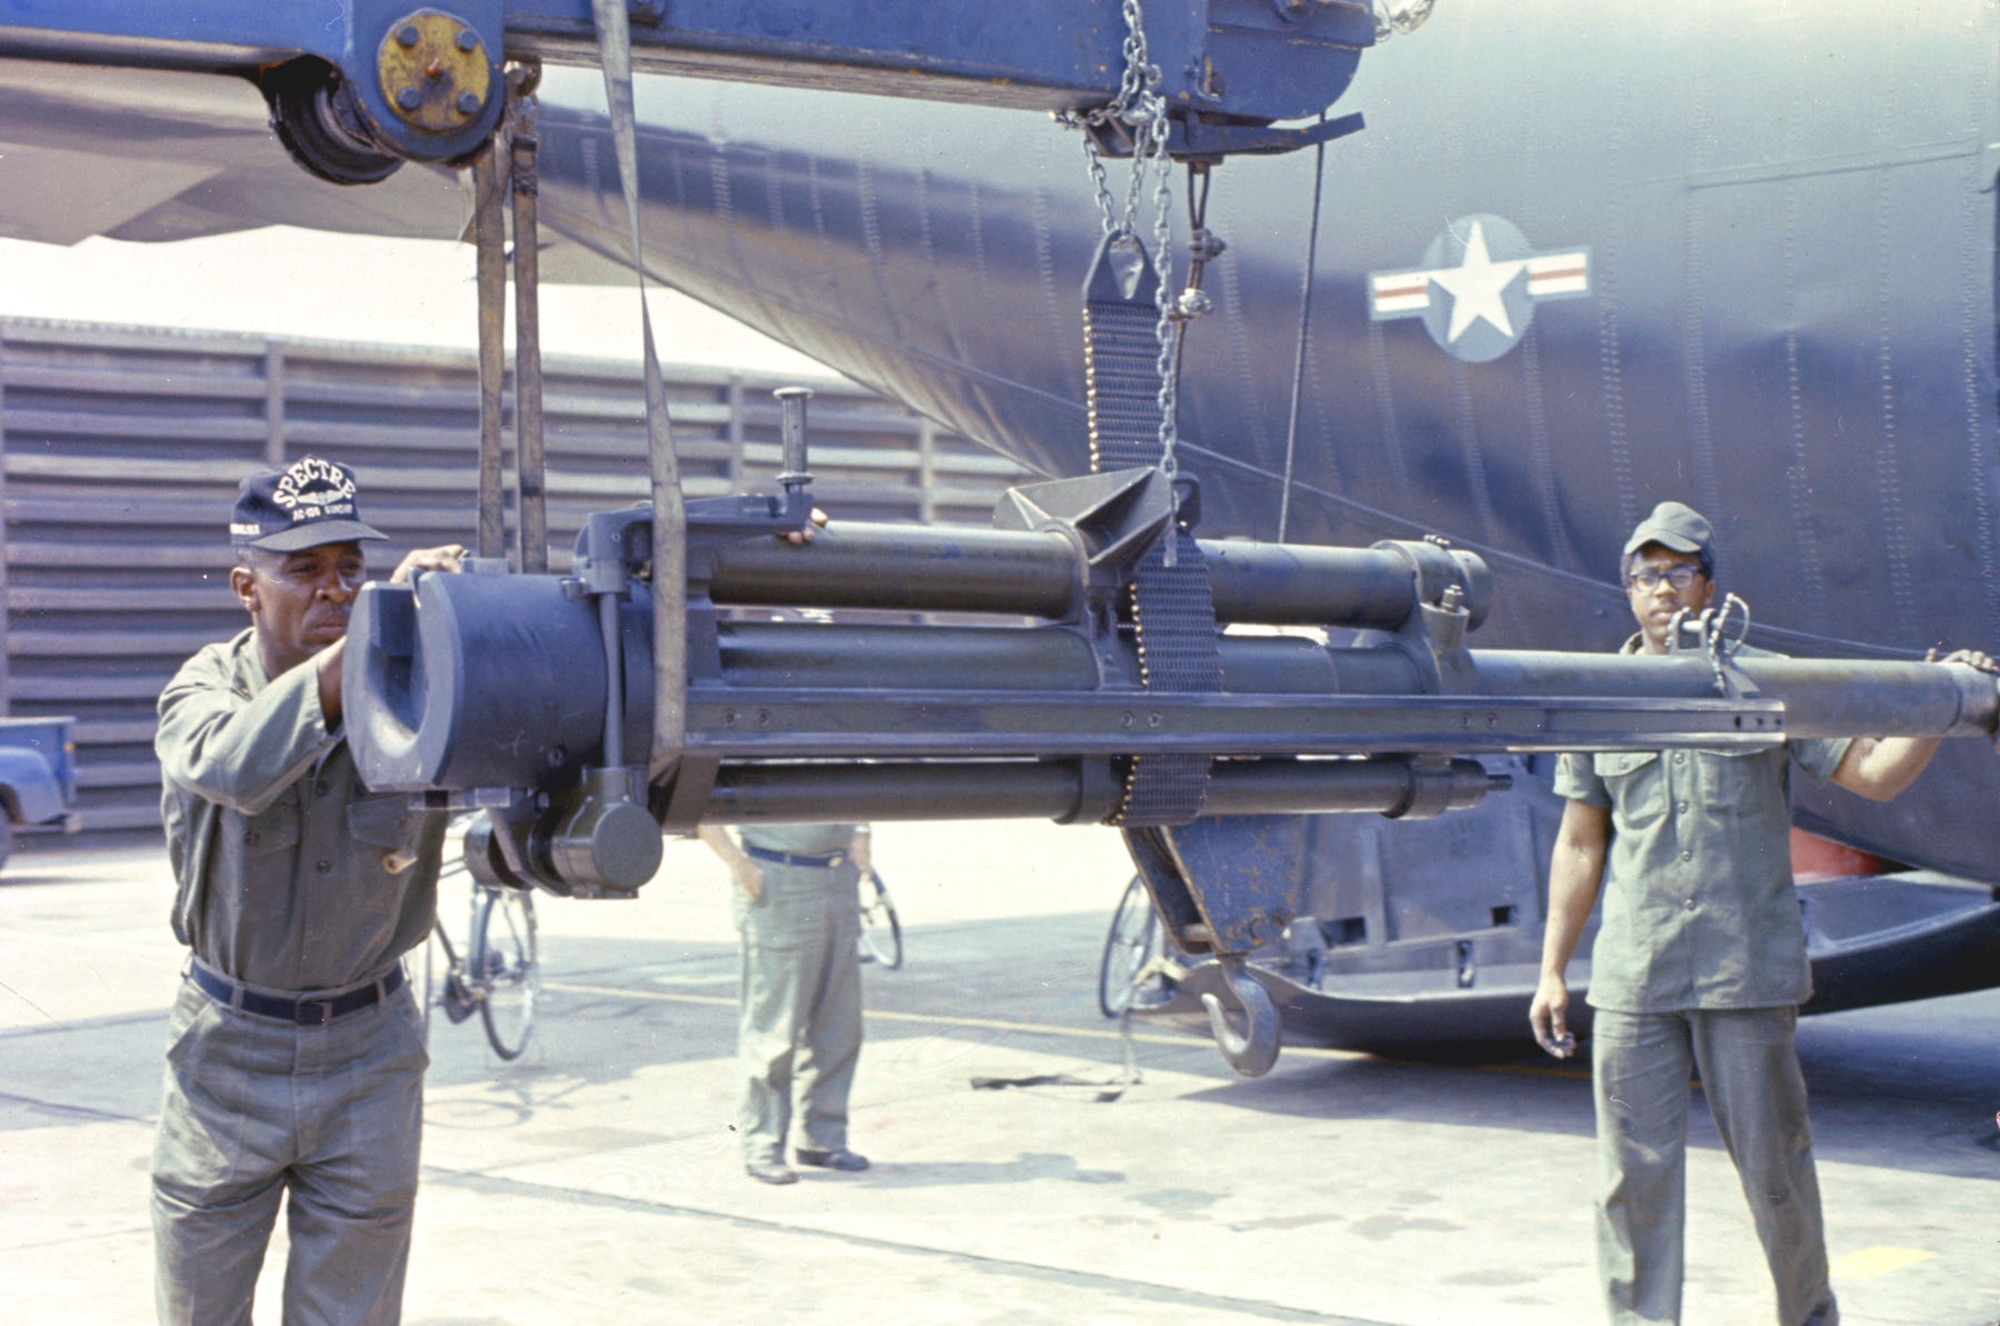 The AC-130’s 105mm gun proved effective against enemy tanks. (U.S. Air Force photo)